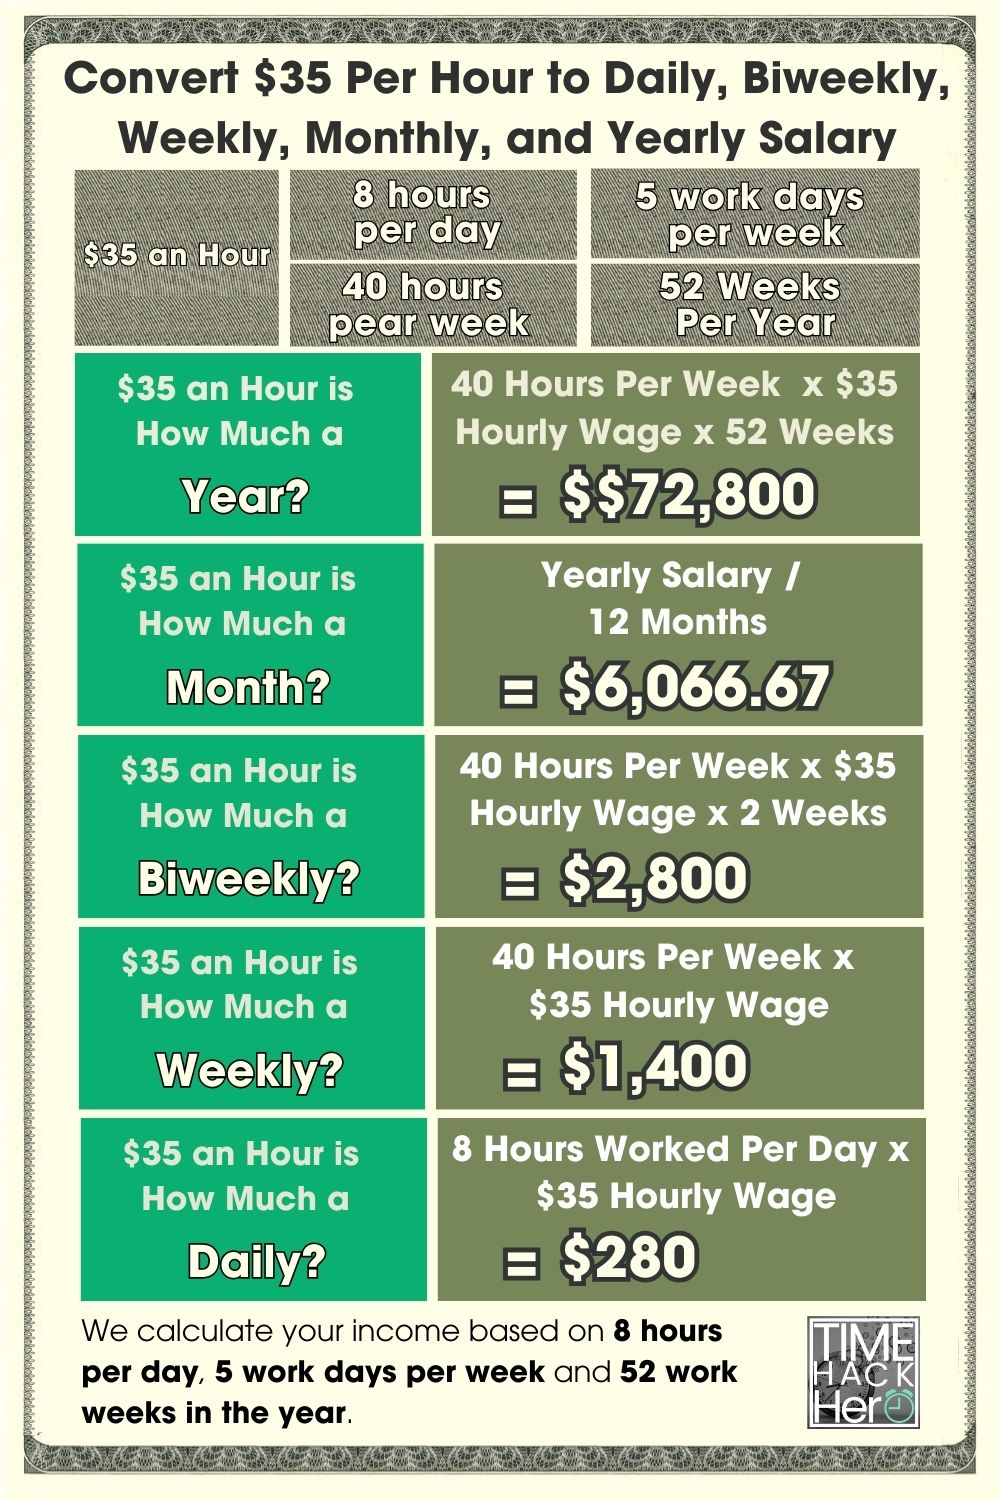 Convert $35 Per Hour to Daily, Biweekly, Weekly, Monthly, and Yearly Salary